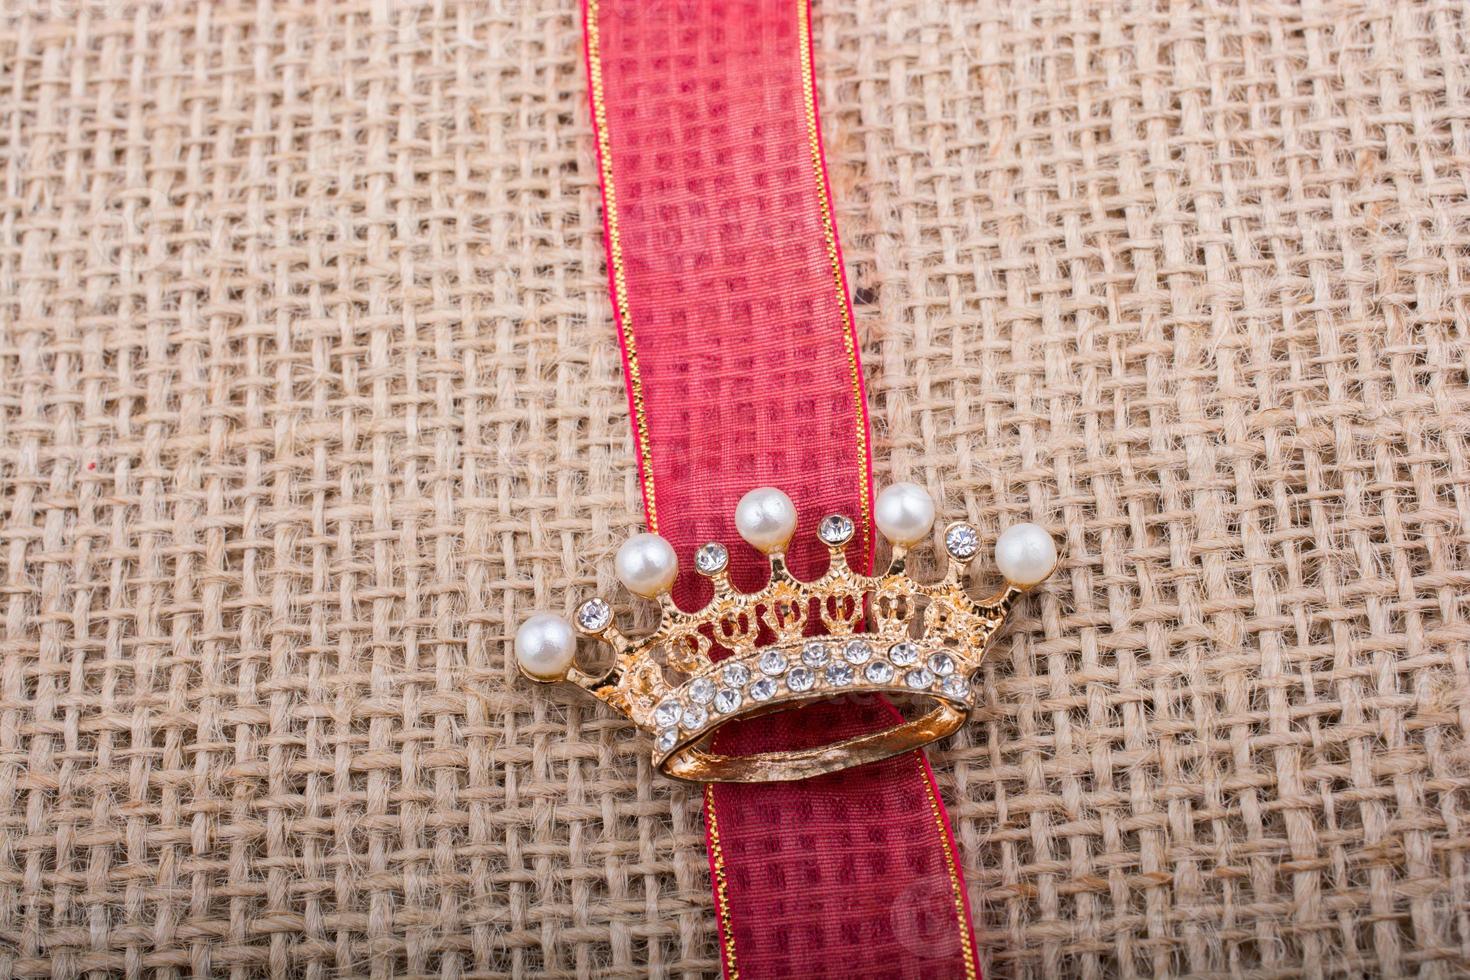 Model crown placed on a band on canvas photo